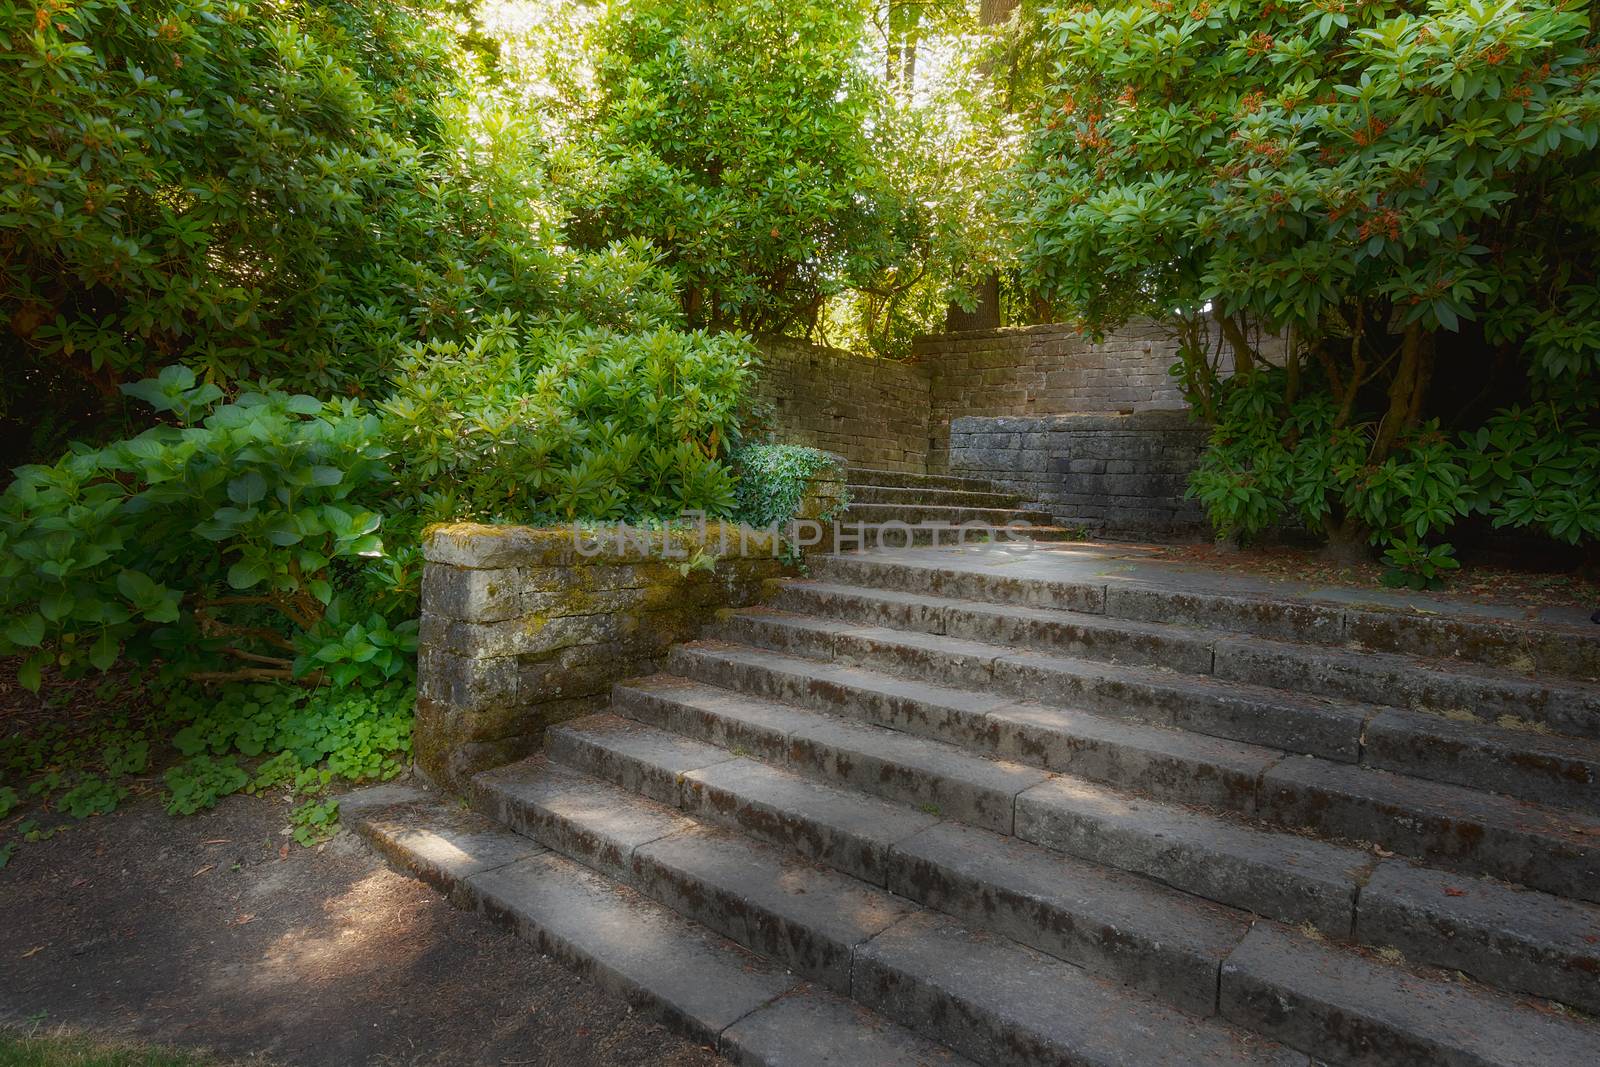 Old Garden with Stone Walls and Stair Steps by Davidgn